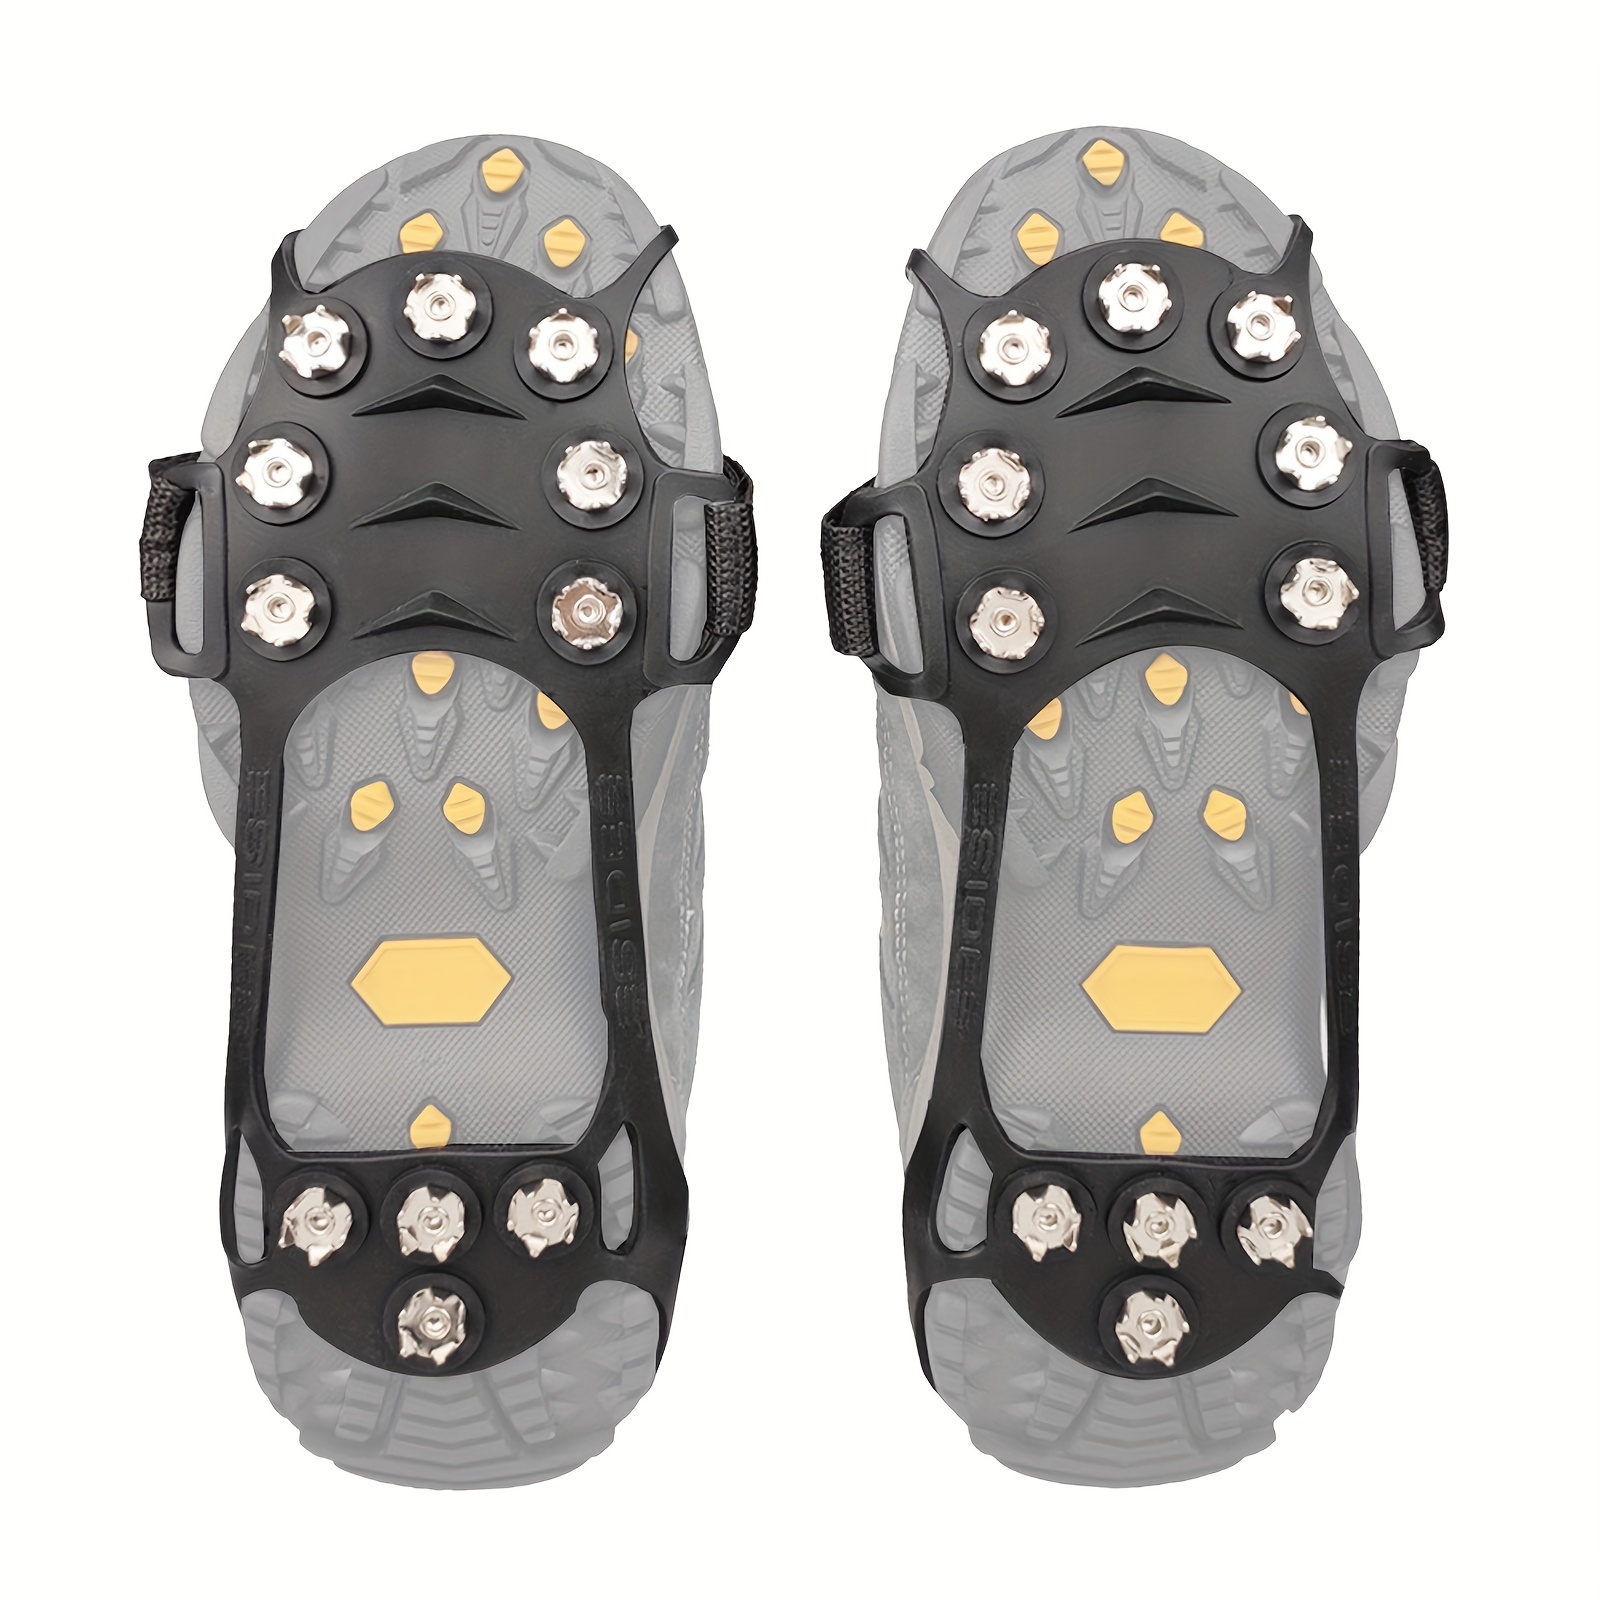 Ice Cleats, for Shoes & boots  Shoe Cleats, Grips, Ice Spikes